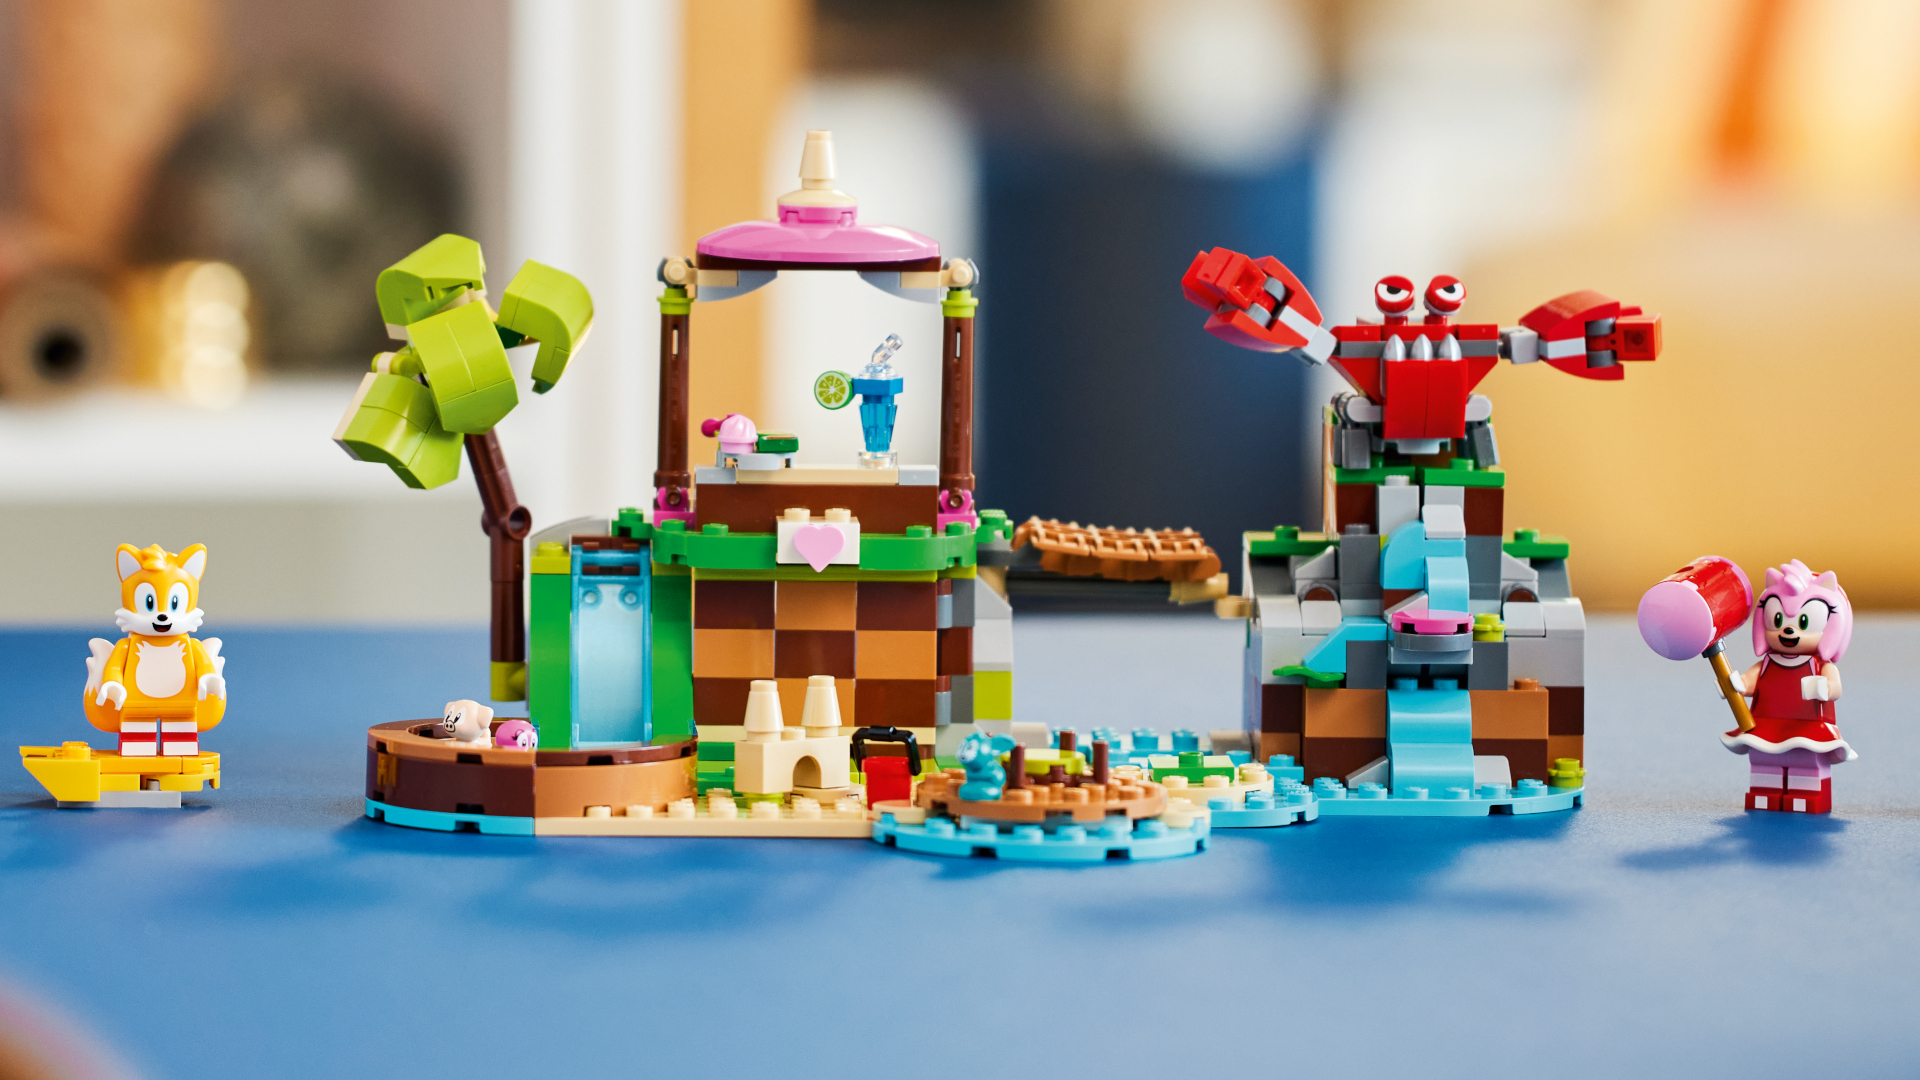 New Lego Sonic sets introduce Tails, Amy, and some high-speed